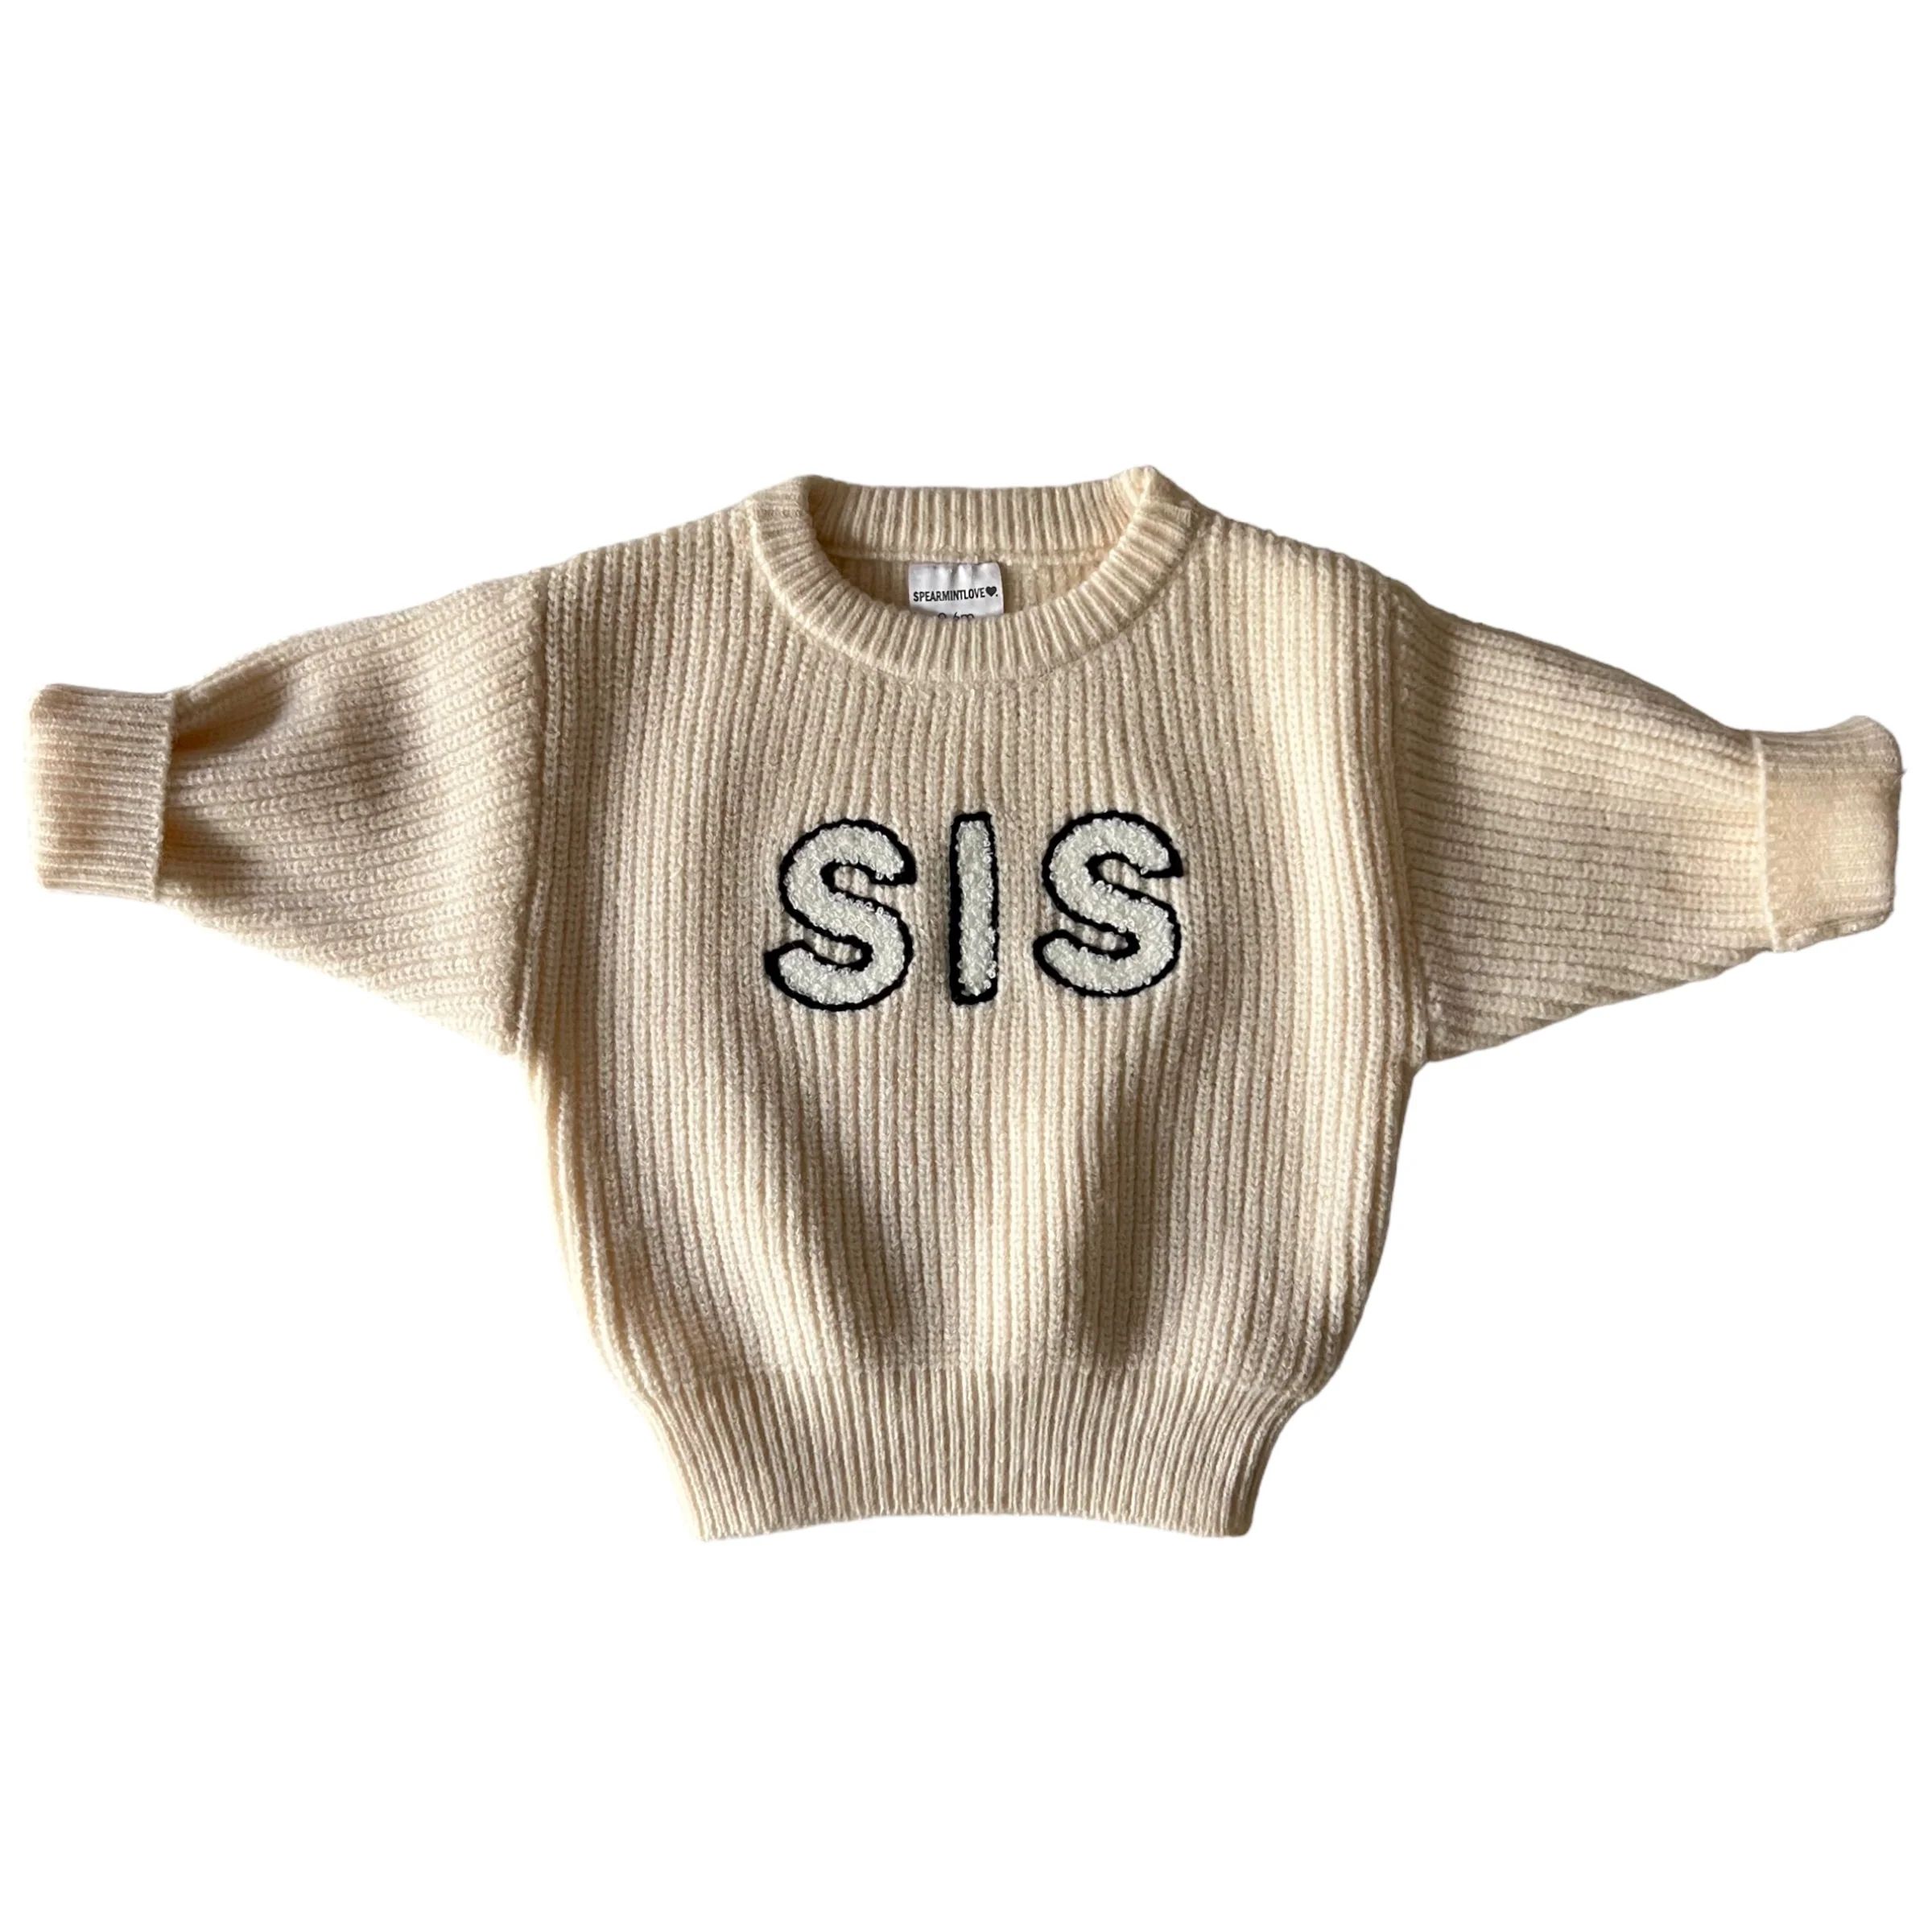 Sis Knit Sweater, Soft White | SpearmintLOVE